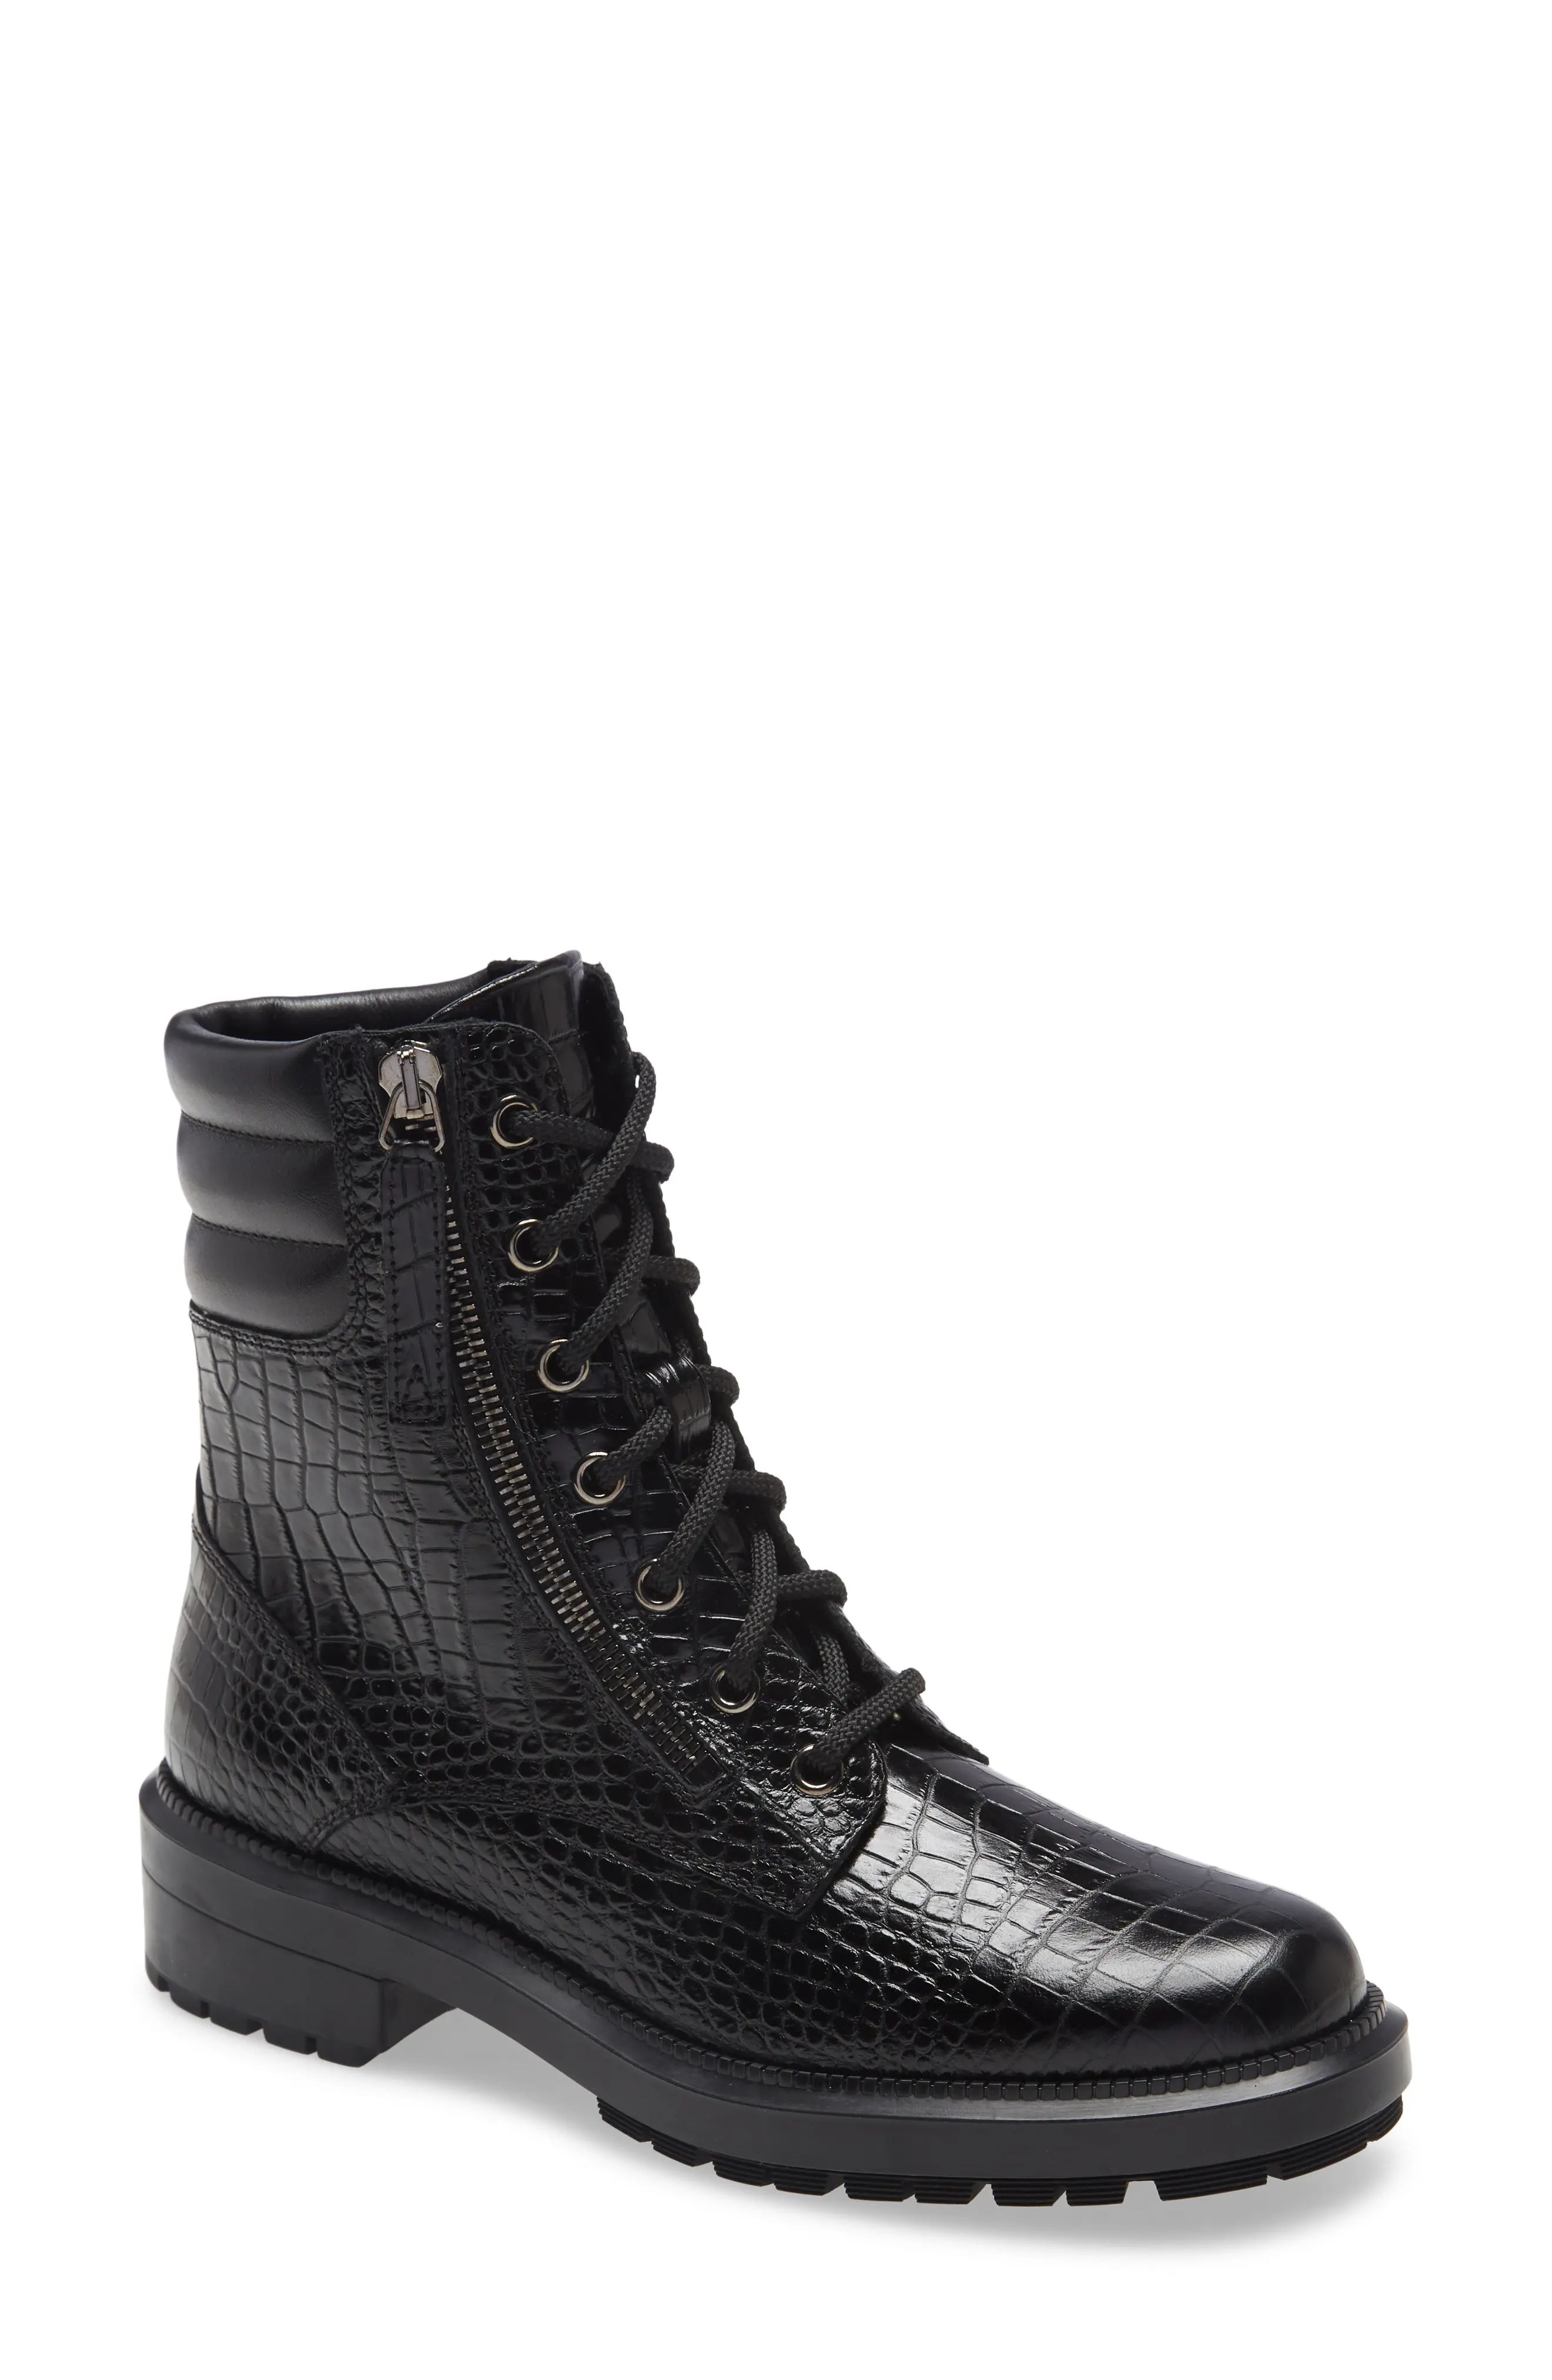 Aquatalia Laila Water Resistant Bootie, Size 6.5 in Black at Nordstrom | Nordstrom